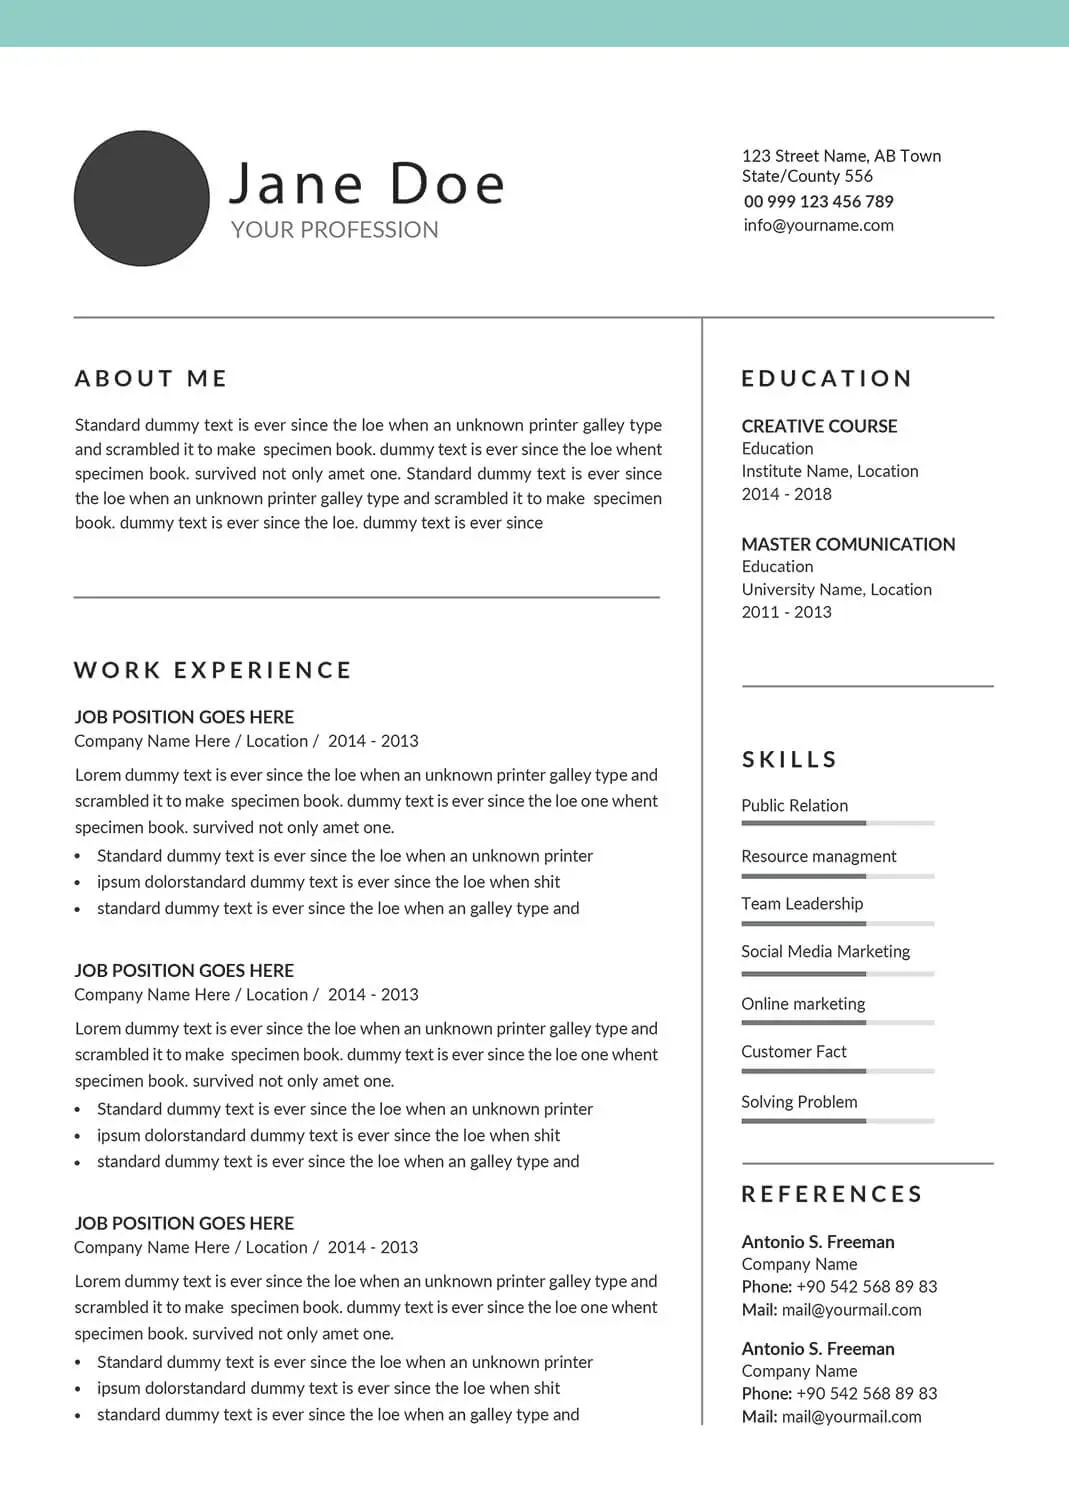 government-worker-resume